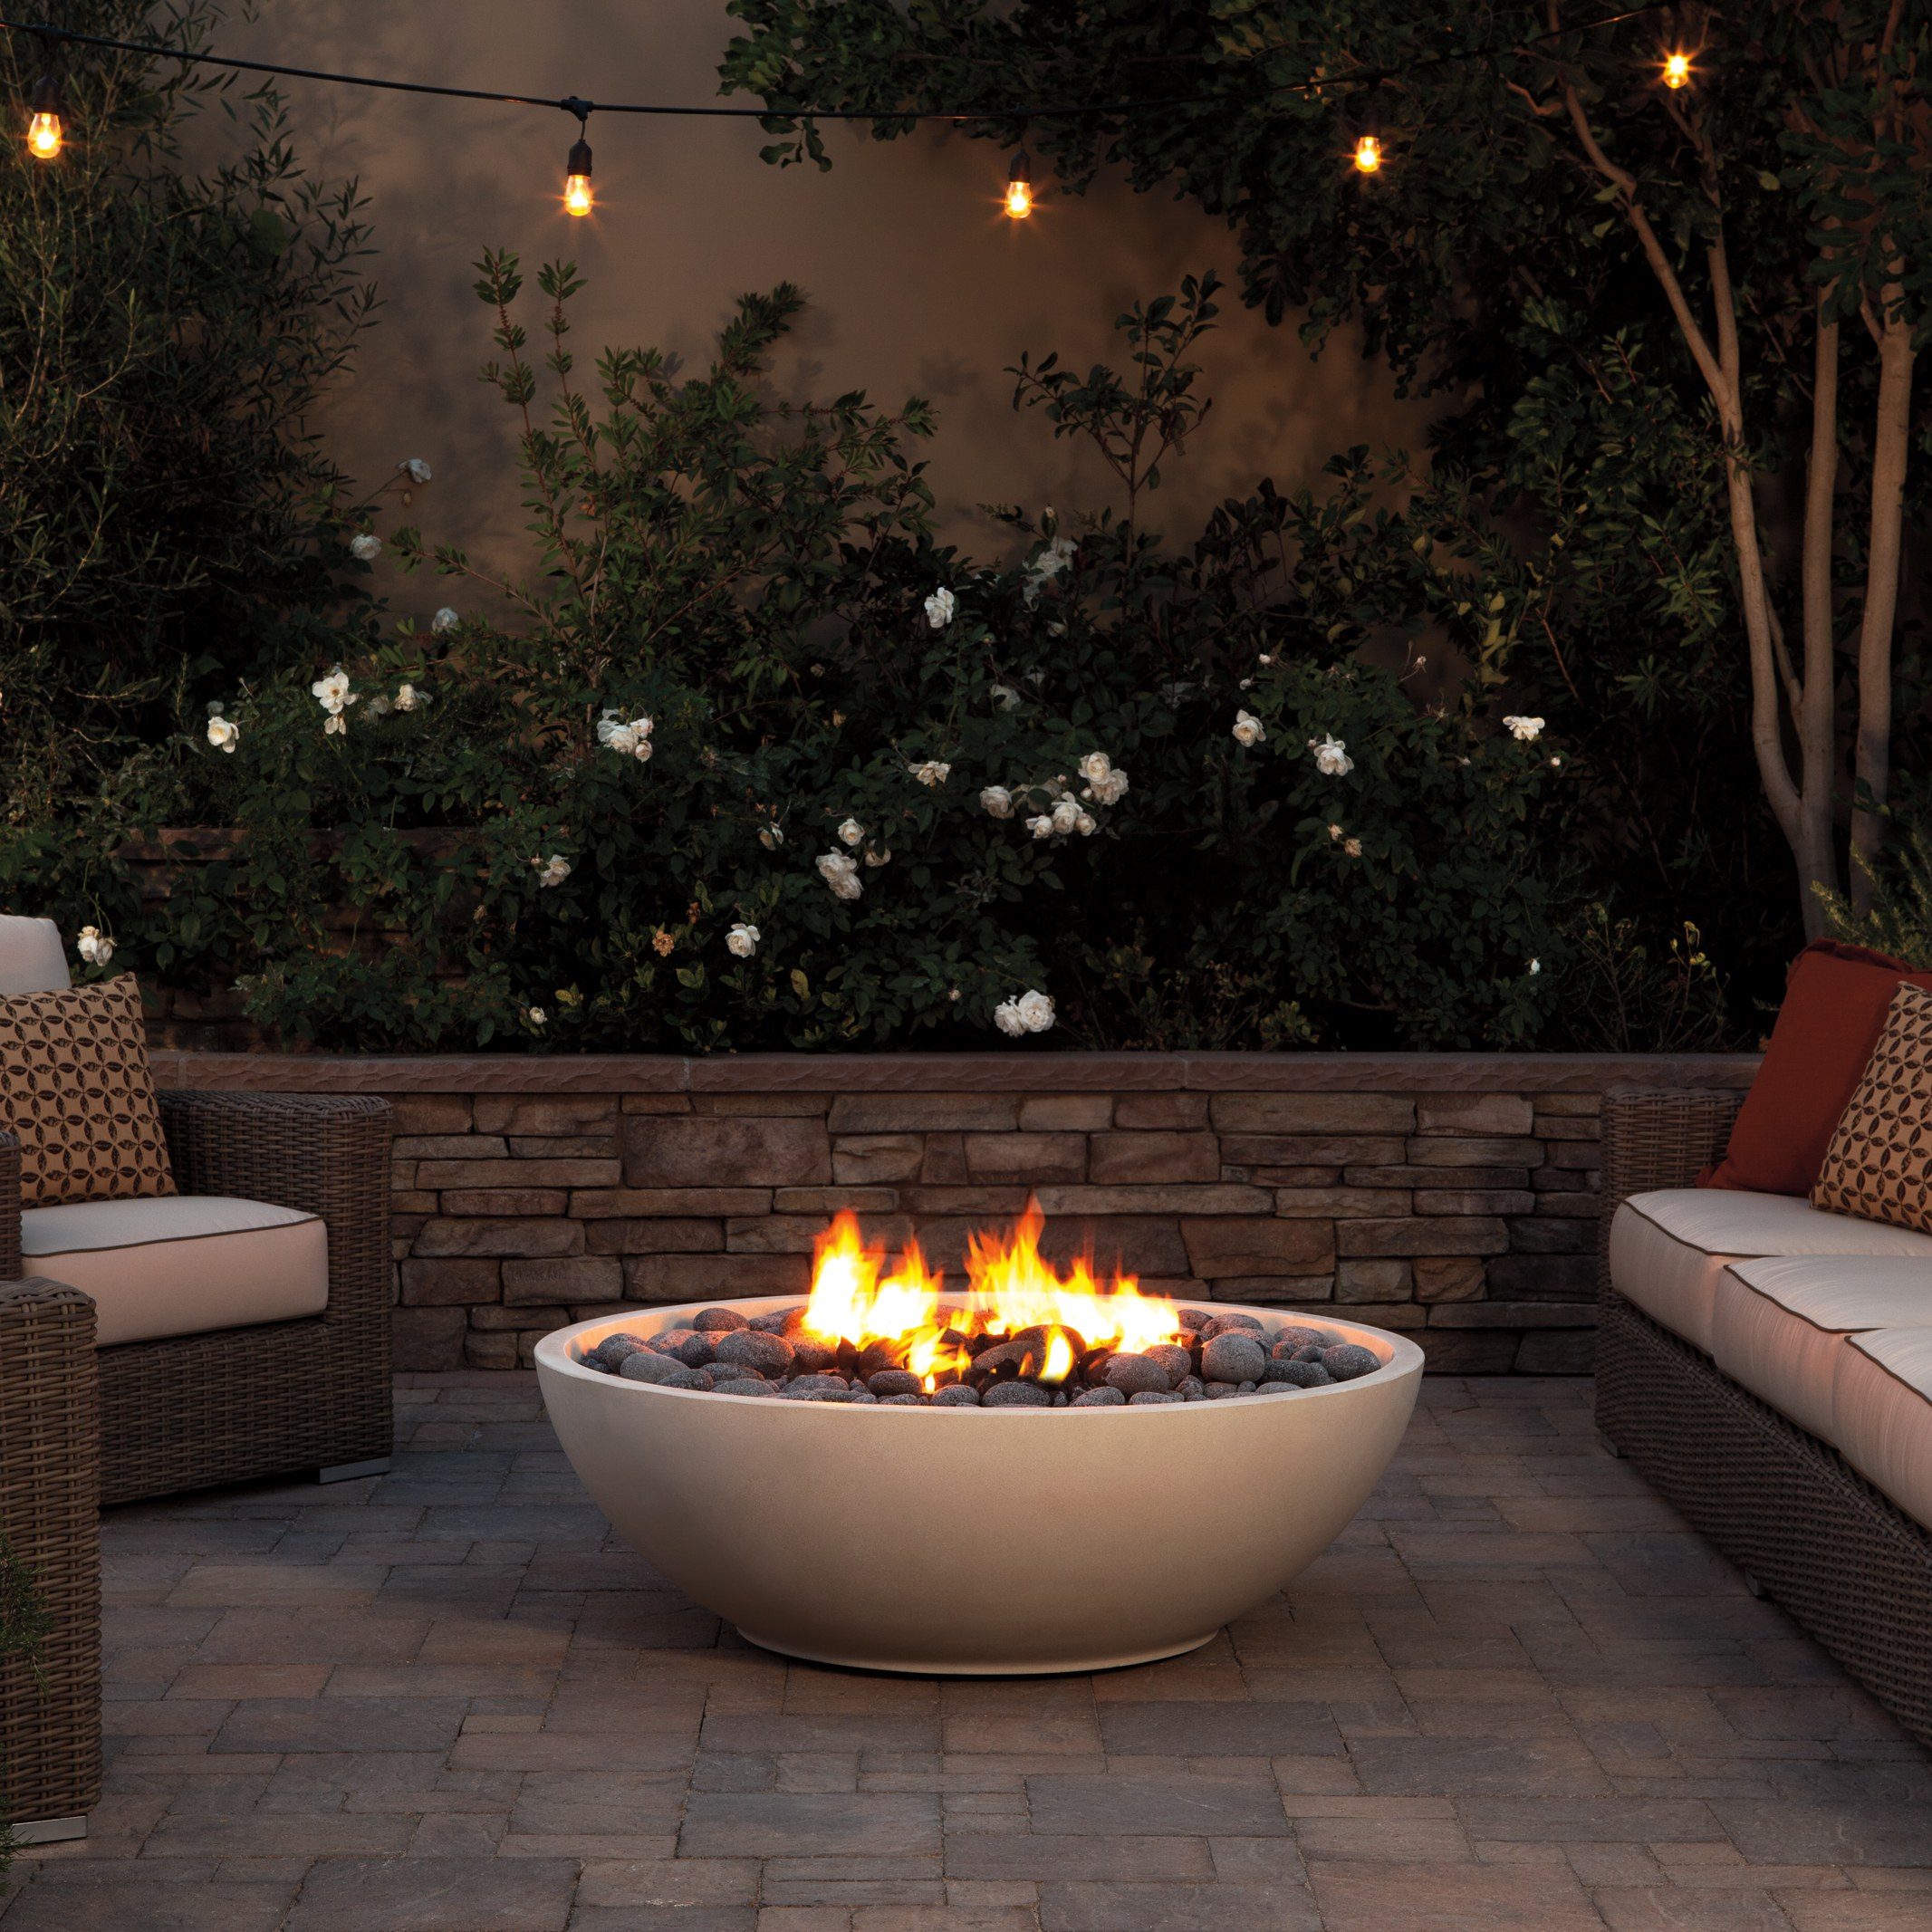 12 Patio Heaters To Make The Most Of A Terrace In Winter within measurements 2133 X 2133